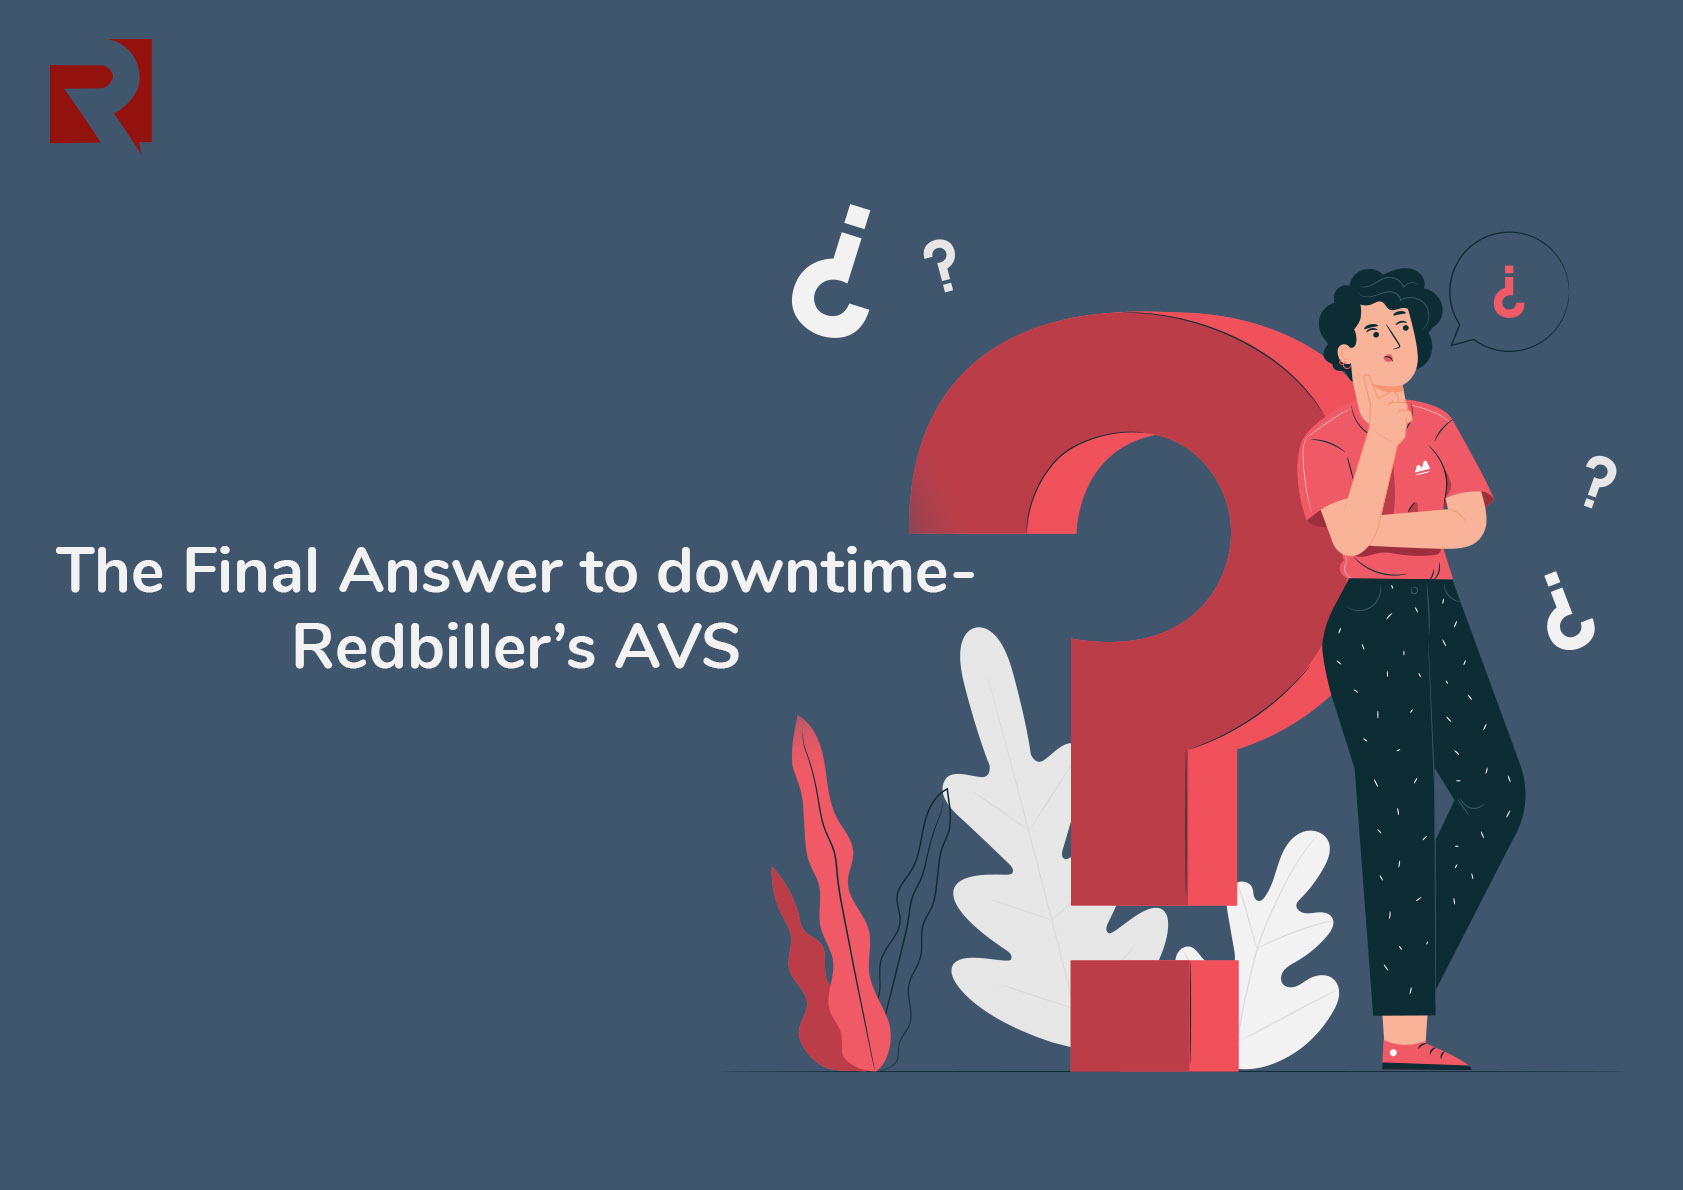 The Final Answer to Downtime -Redbiller’s AVS